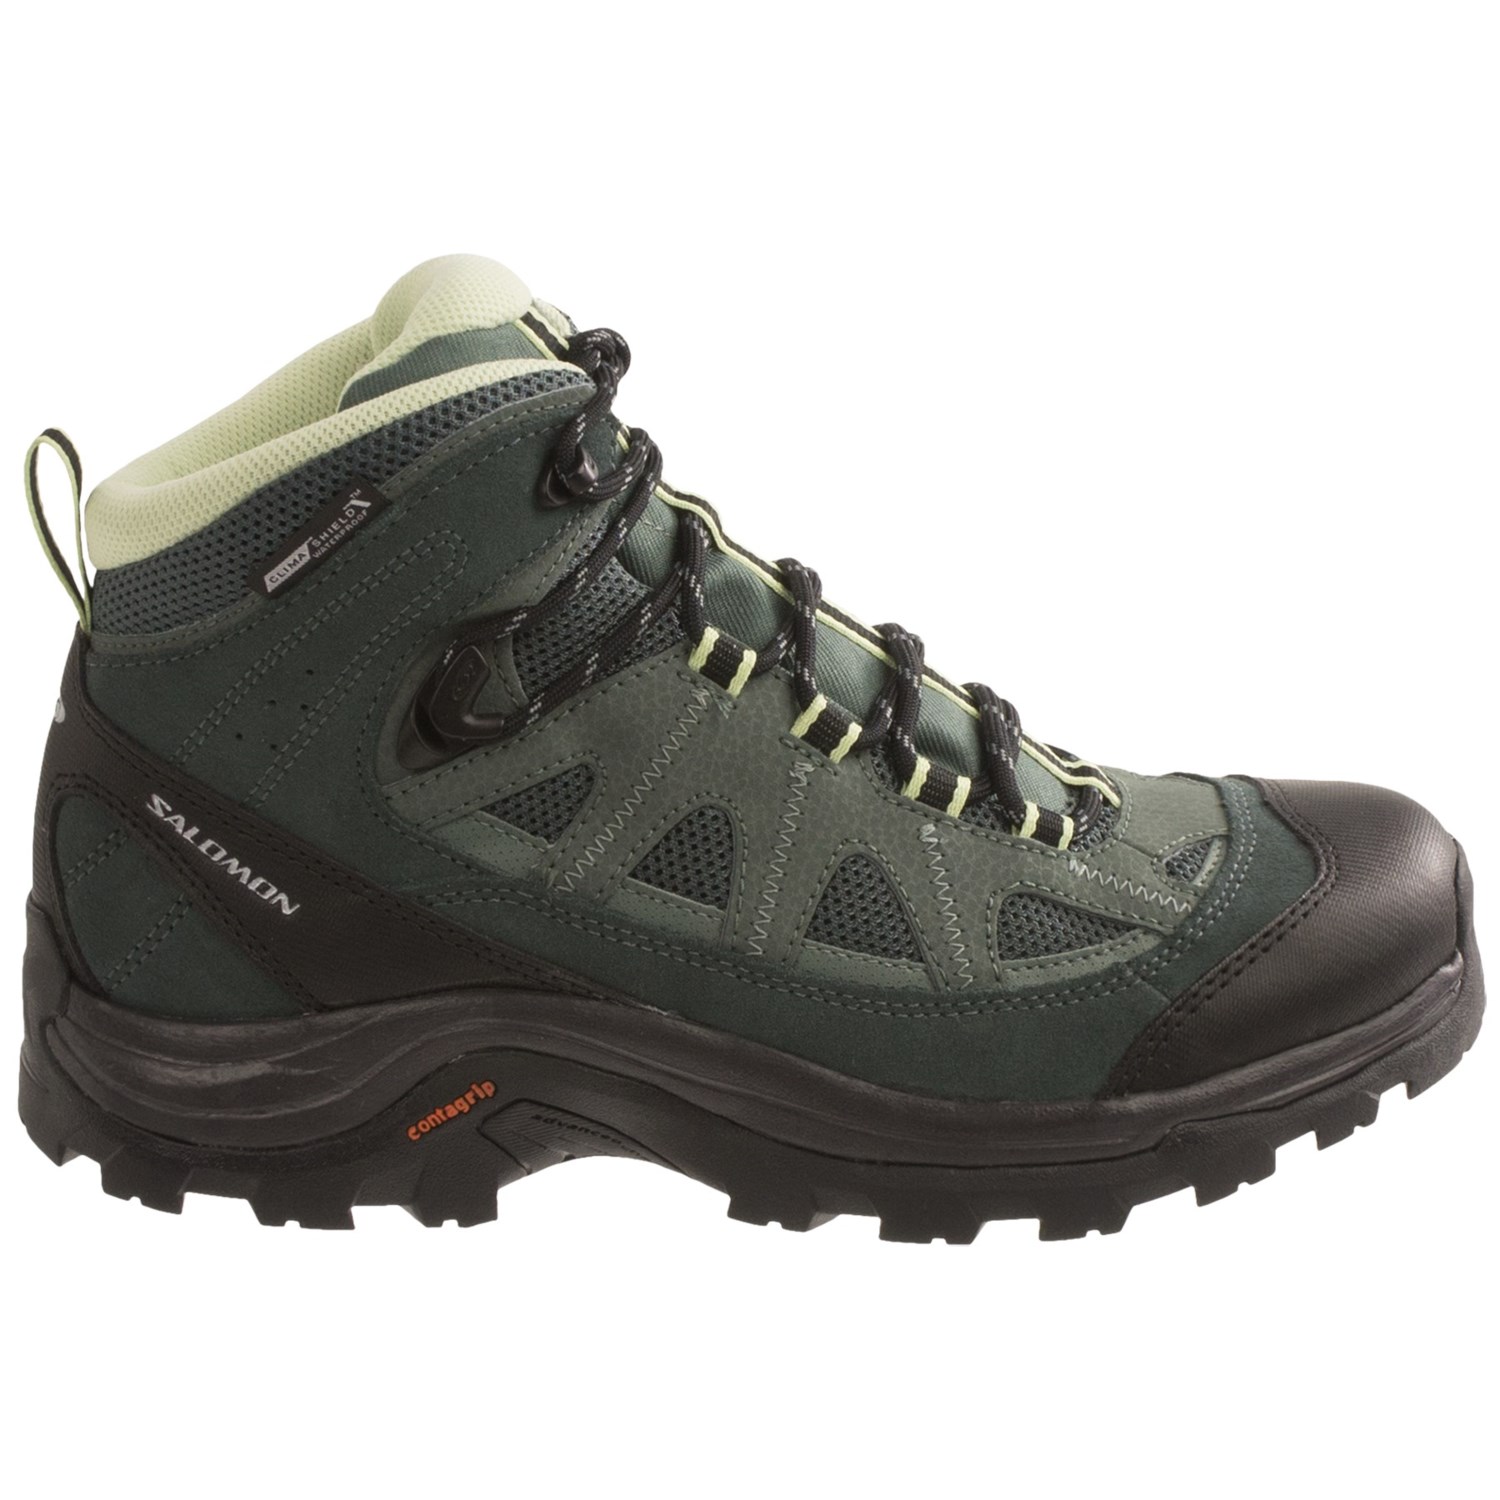 Salomon Authentic Leather Climashield® Hiking Boots (For Women) - Save 26%